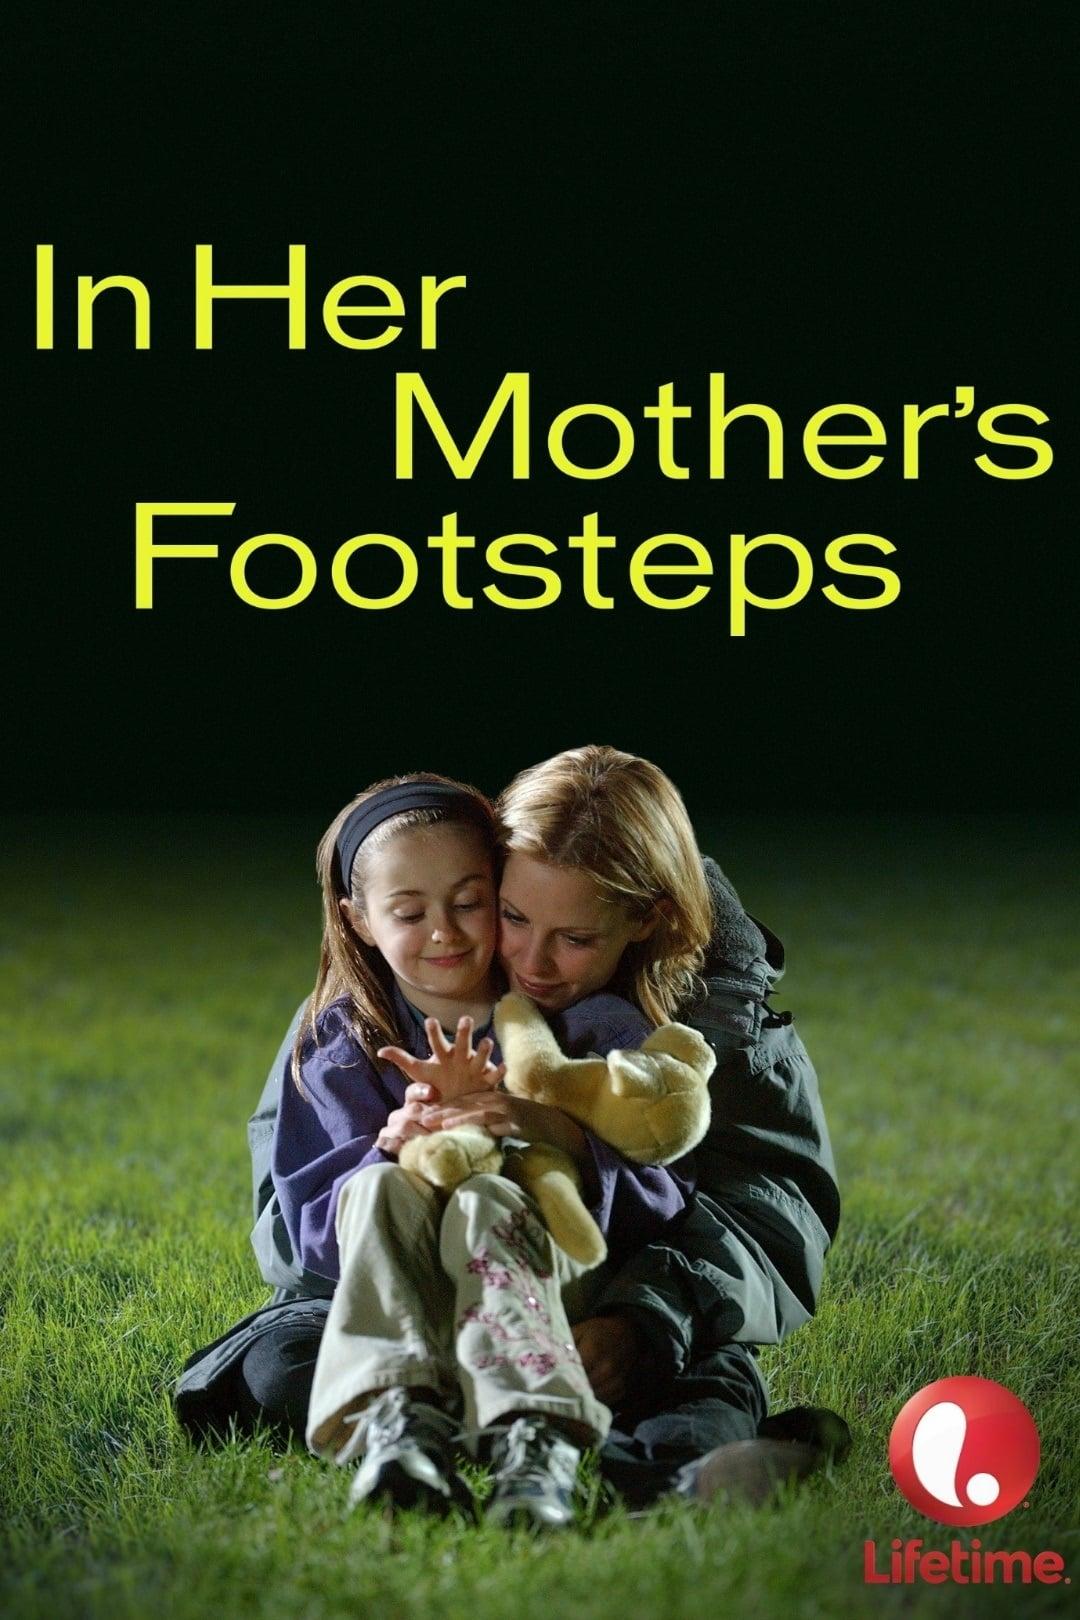 In Her Mother's Footsteps poster